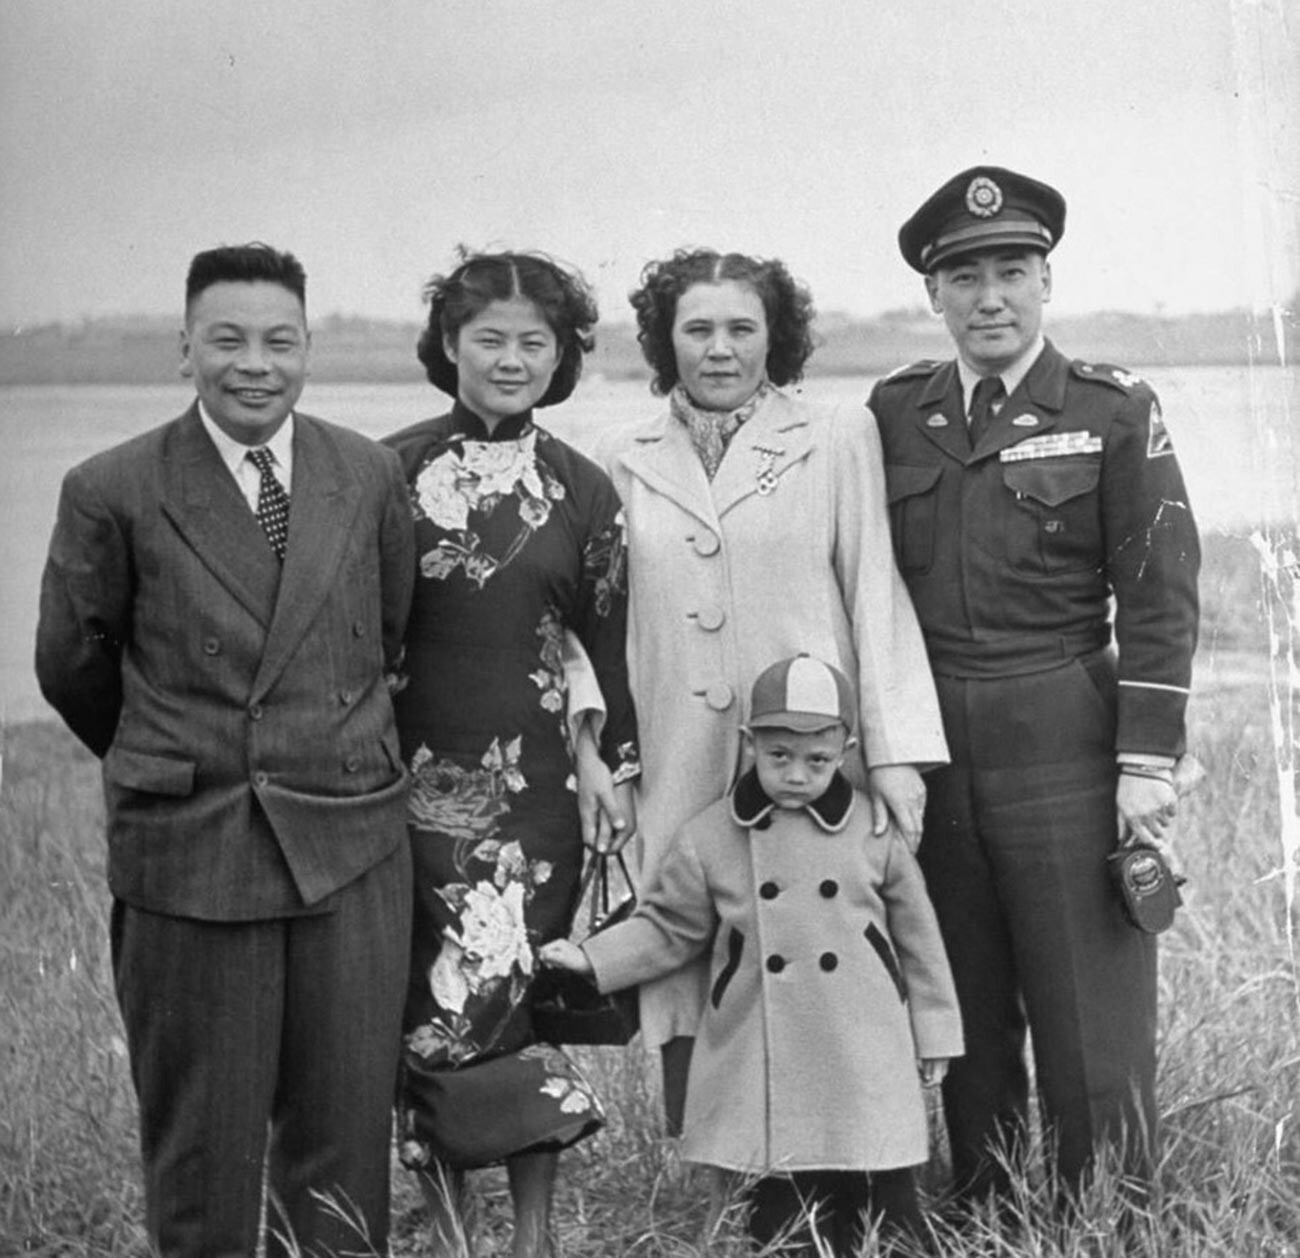 Chiang Ching-kuo with his family in the 1950s.